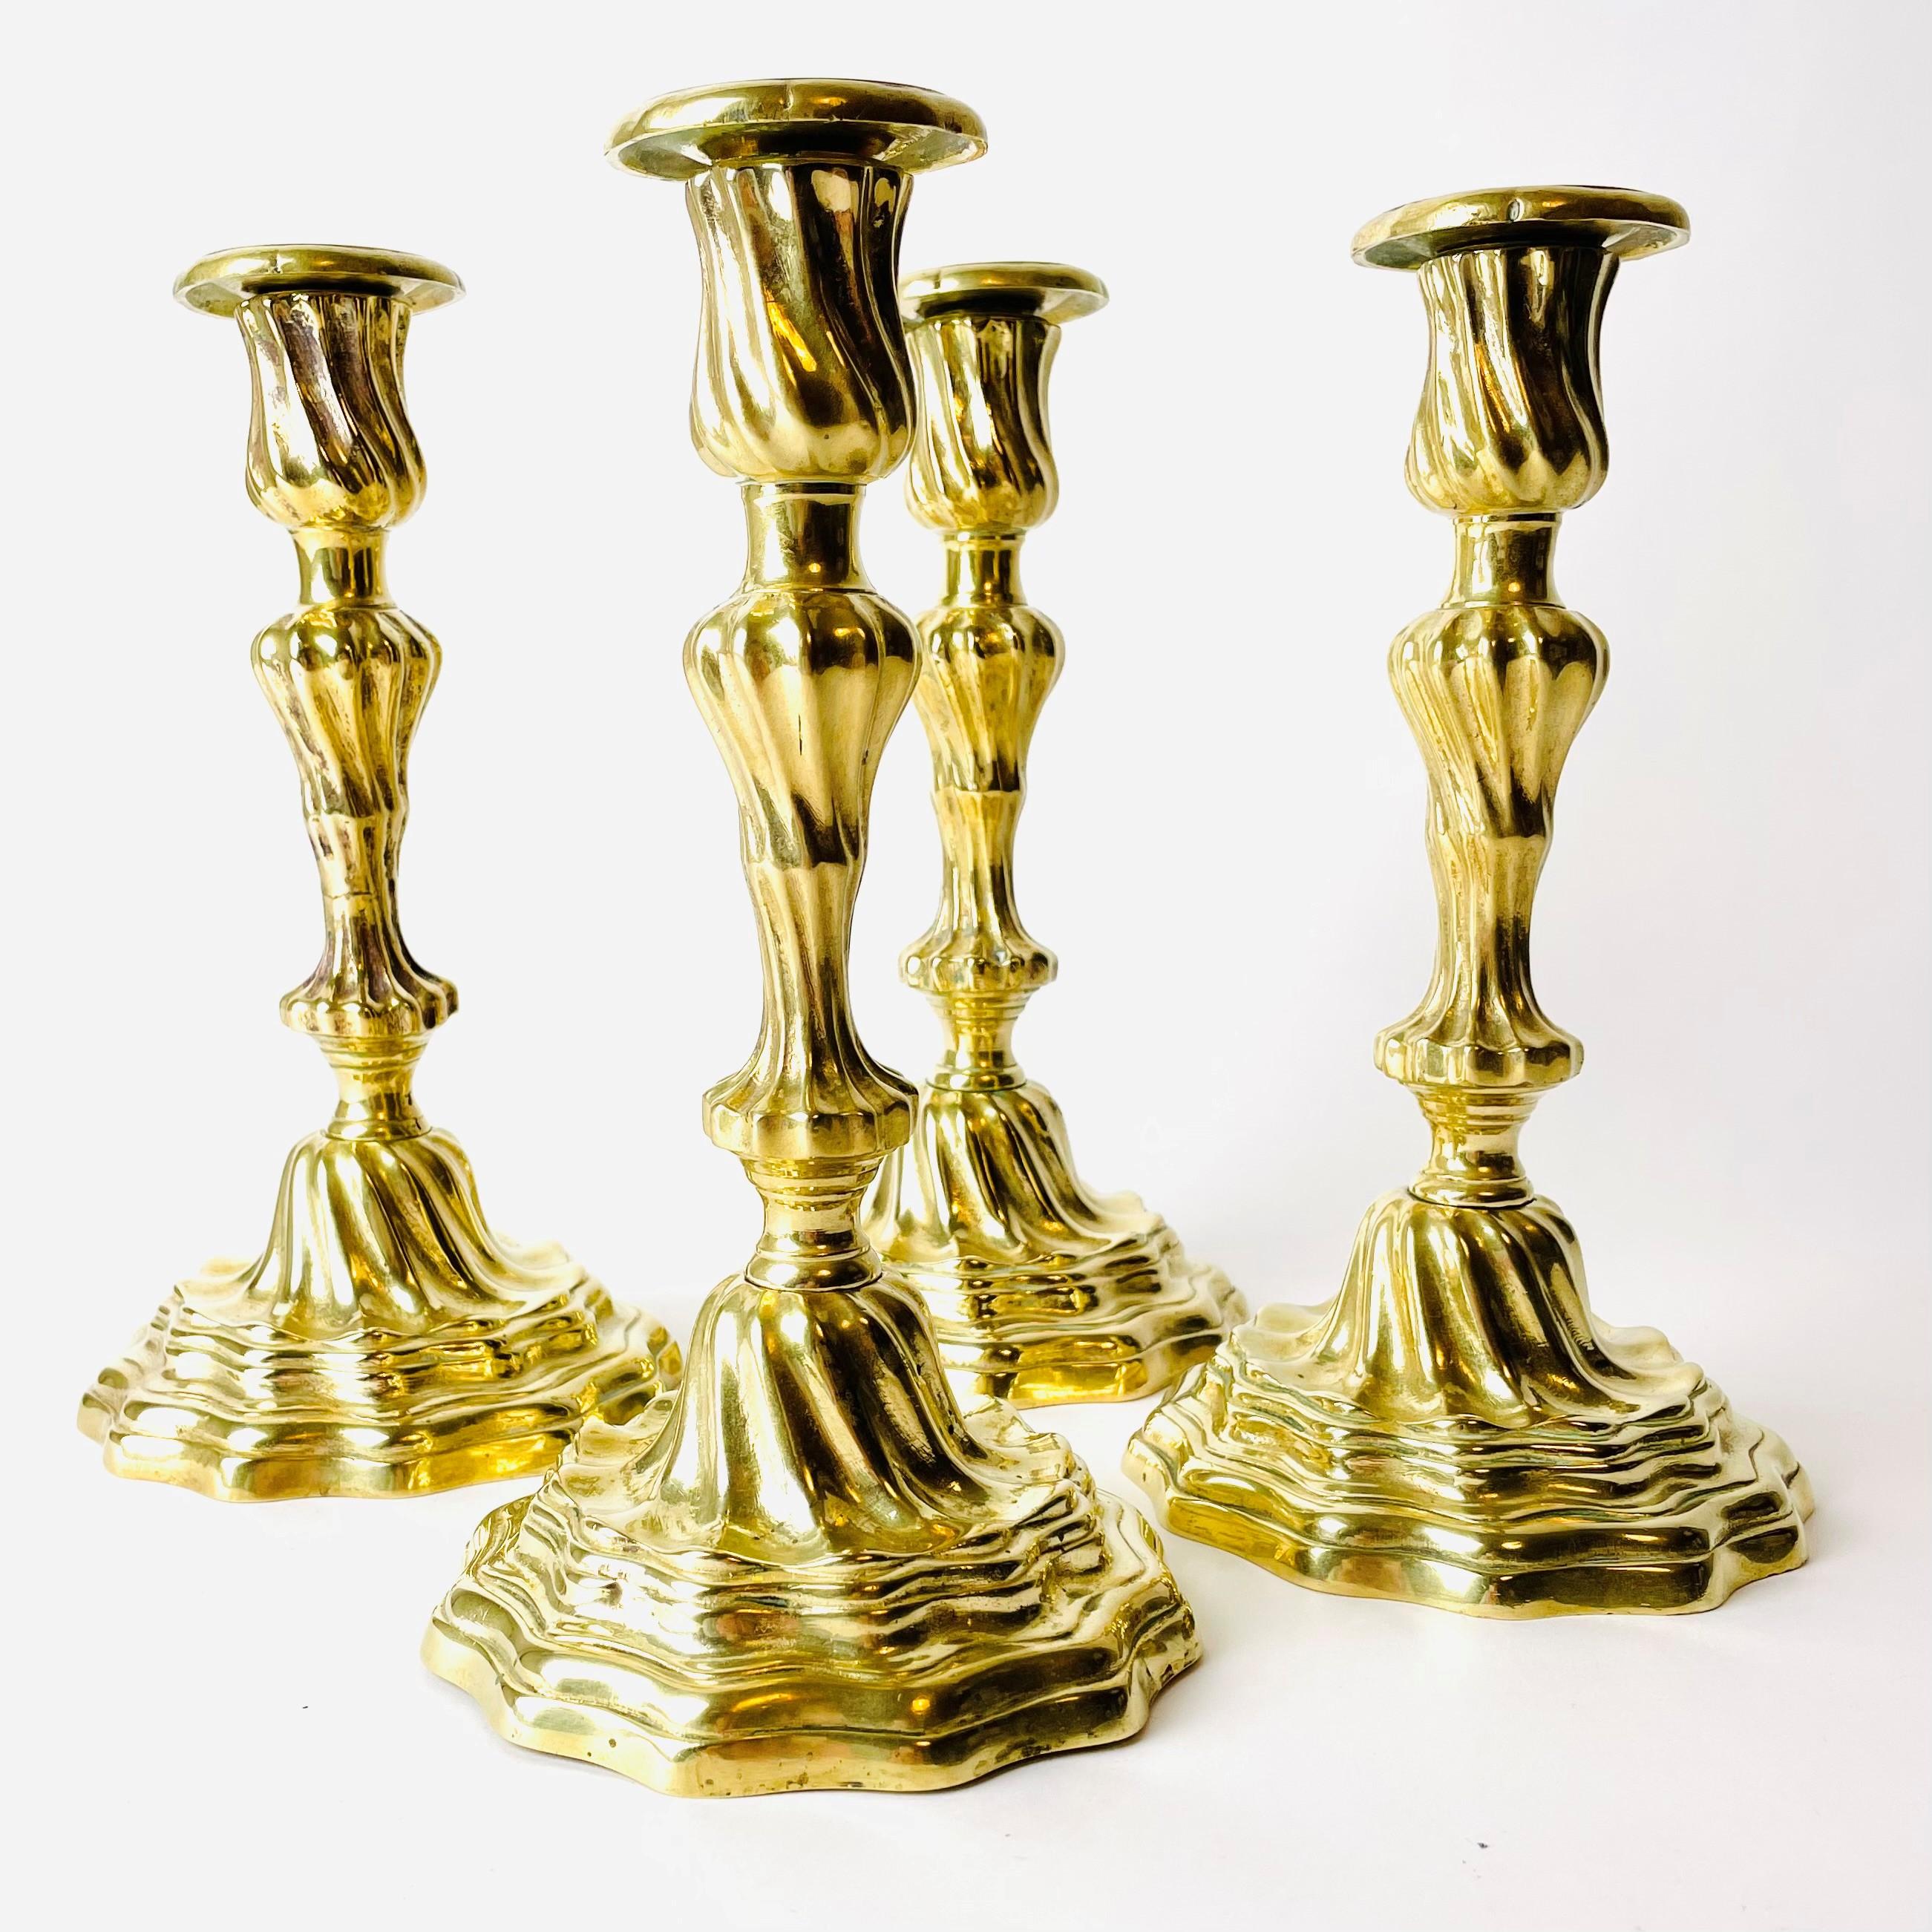 Four Beautiful and very rare candlesticks in gilded bronze from 1760s in Louis XV. Most probably made in Paris. Provenance from the Banque de France, complete with inventory number from the Banque.

These beautiful Louis XV candlesticks feature a